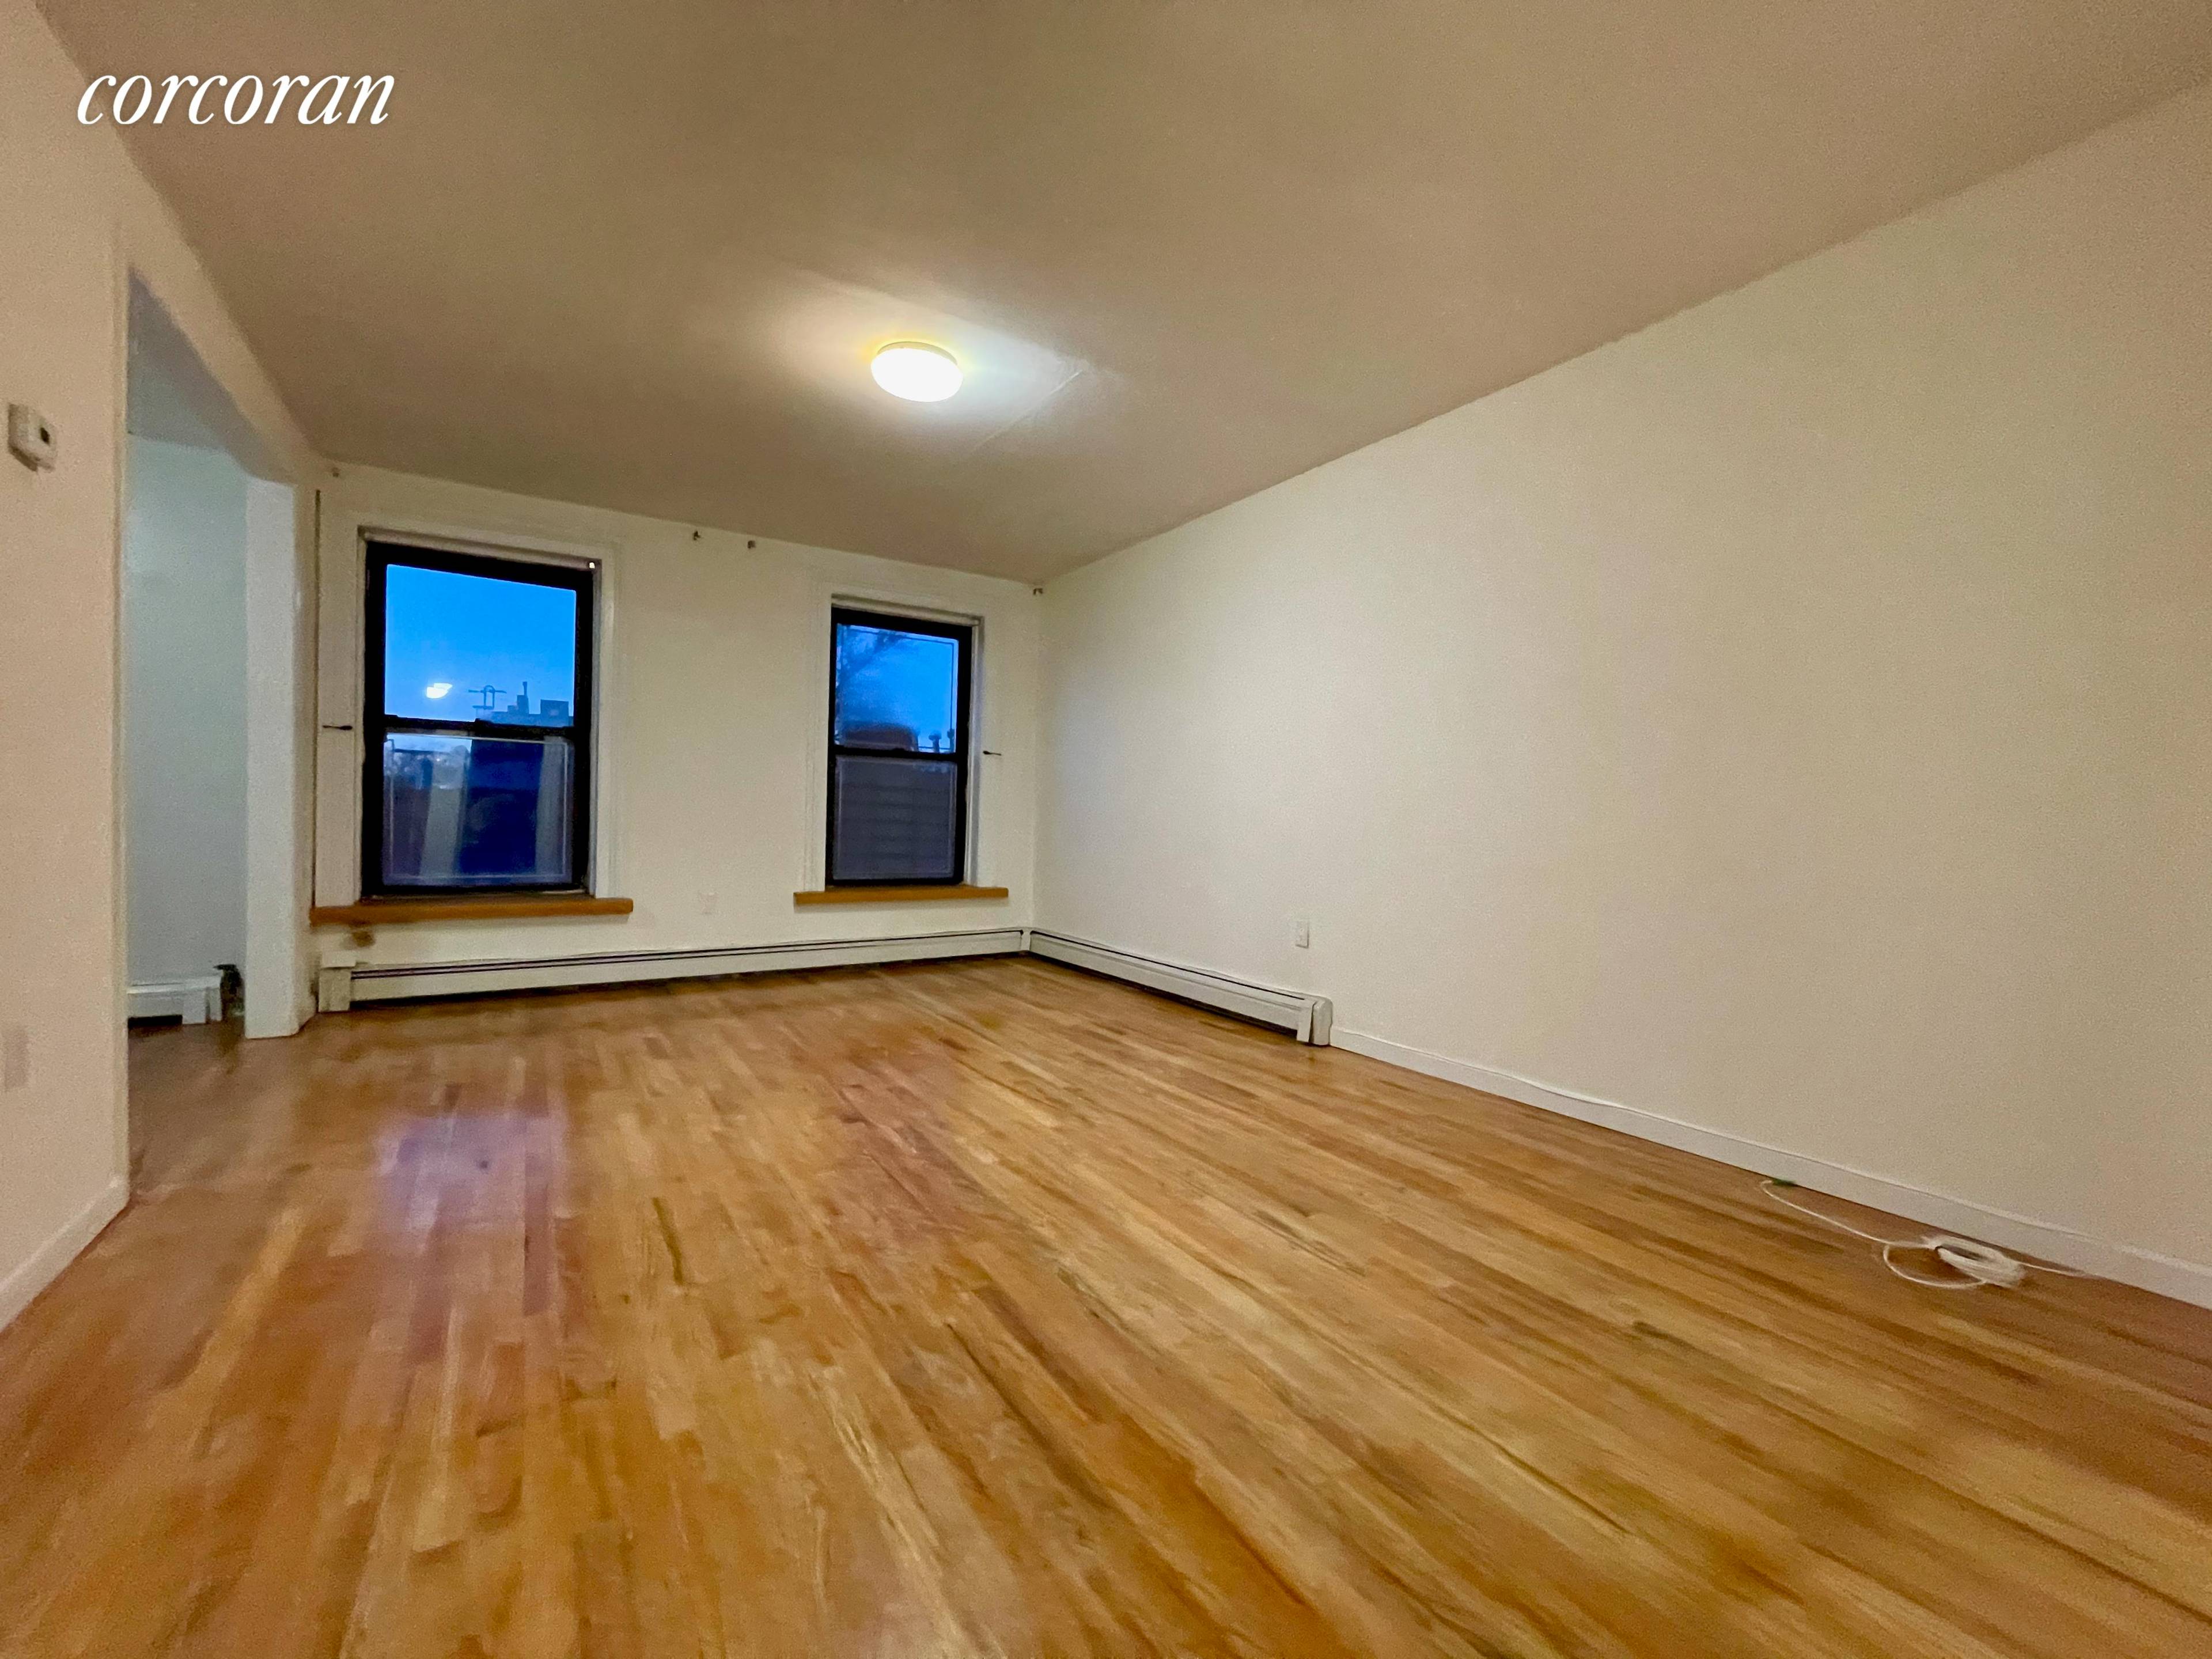 Massive Floor through 2 bedroom apartment situated in a heart of Fort Greene located on Greene Ave between So Oxford and Cumberland Streets, directly across from charming Cuyler Gore Park.